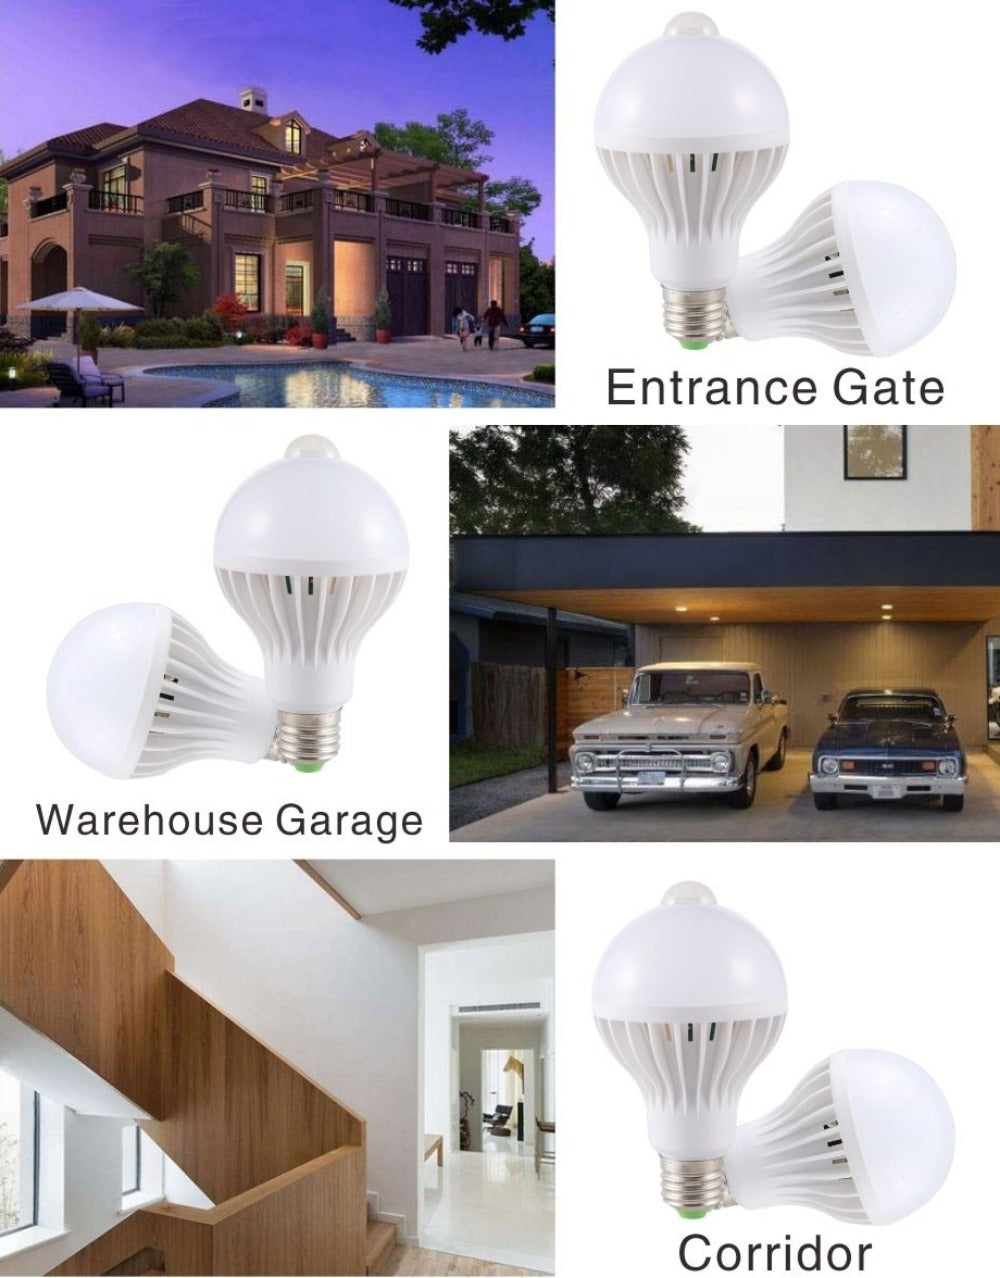 Everyday.Discount ledlight infrared night lighting safety indoors vs outside wireless lights  electra saving lights for stairs ceiling gardens fence hallway table kitchen lampada u.s.a. europe spain lampu otomatis replacement lights eco friendly vs interior lighting 